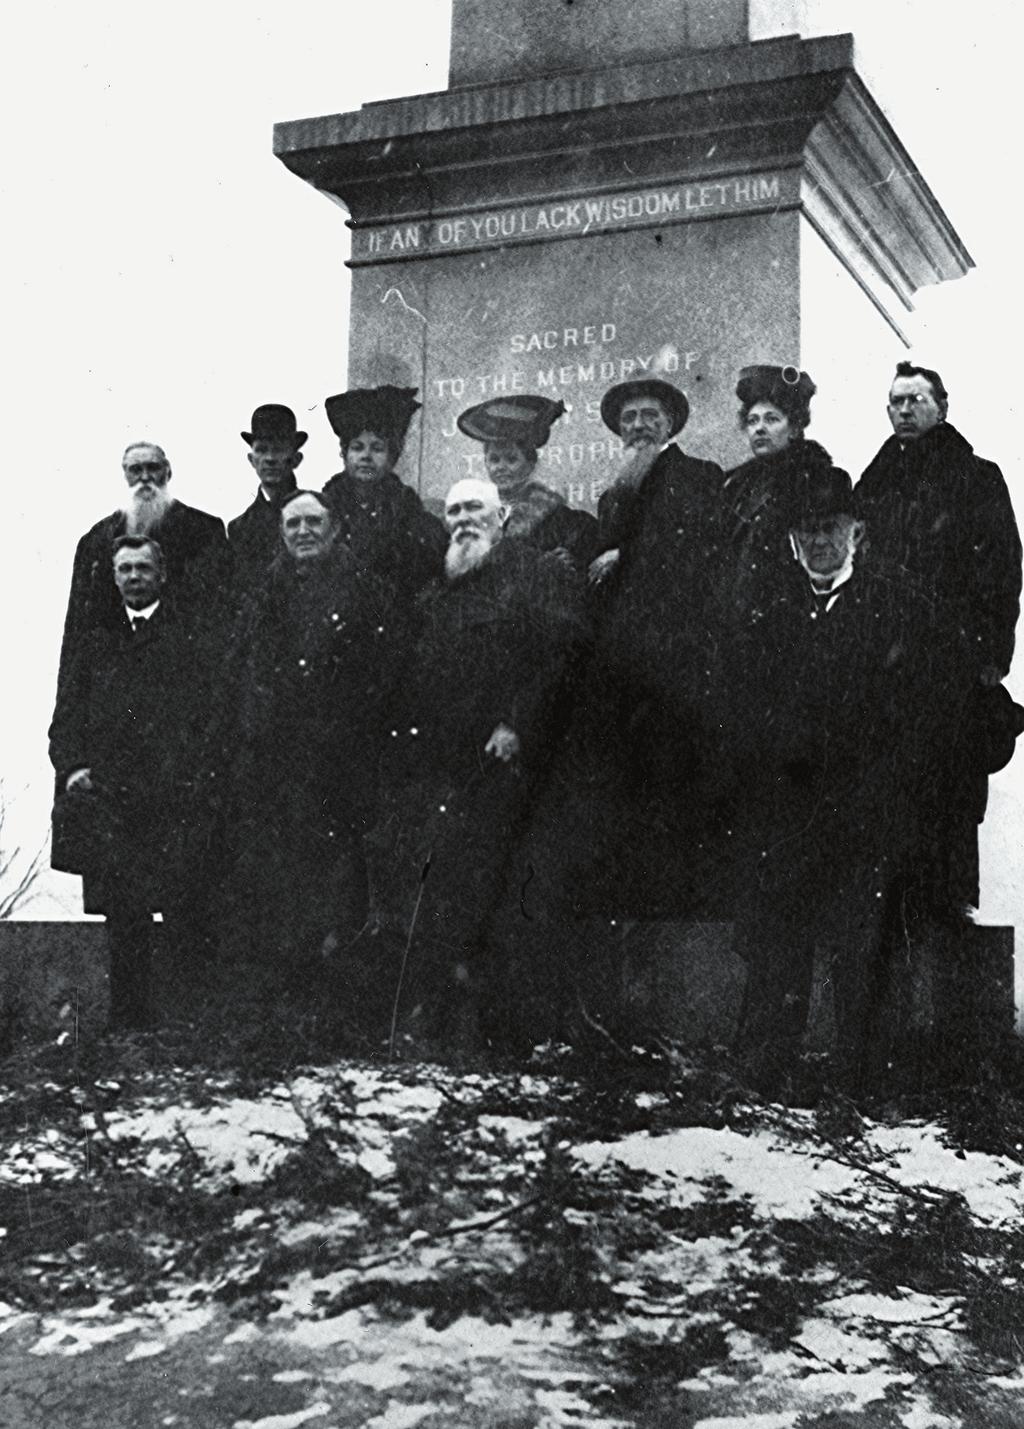 Lorin Farr, Friend of the Prophet 67 Members of Smith family at base of Joseph Smith Monument, 1905.